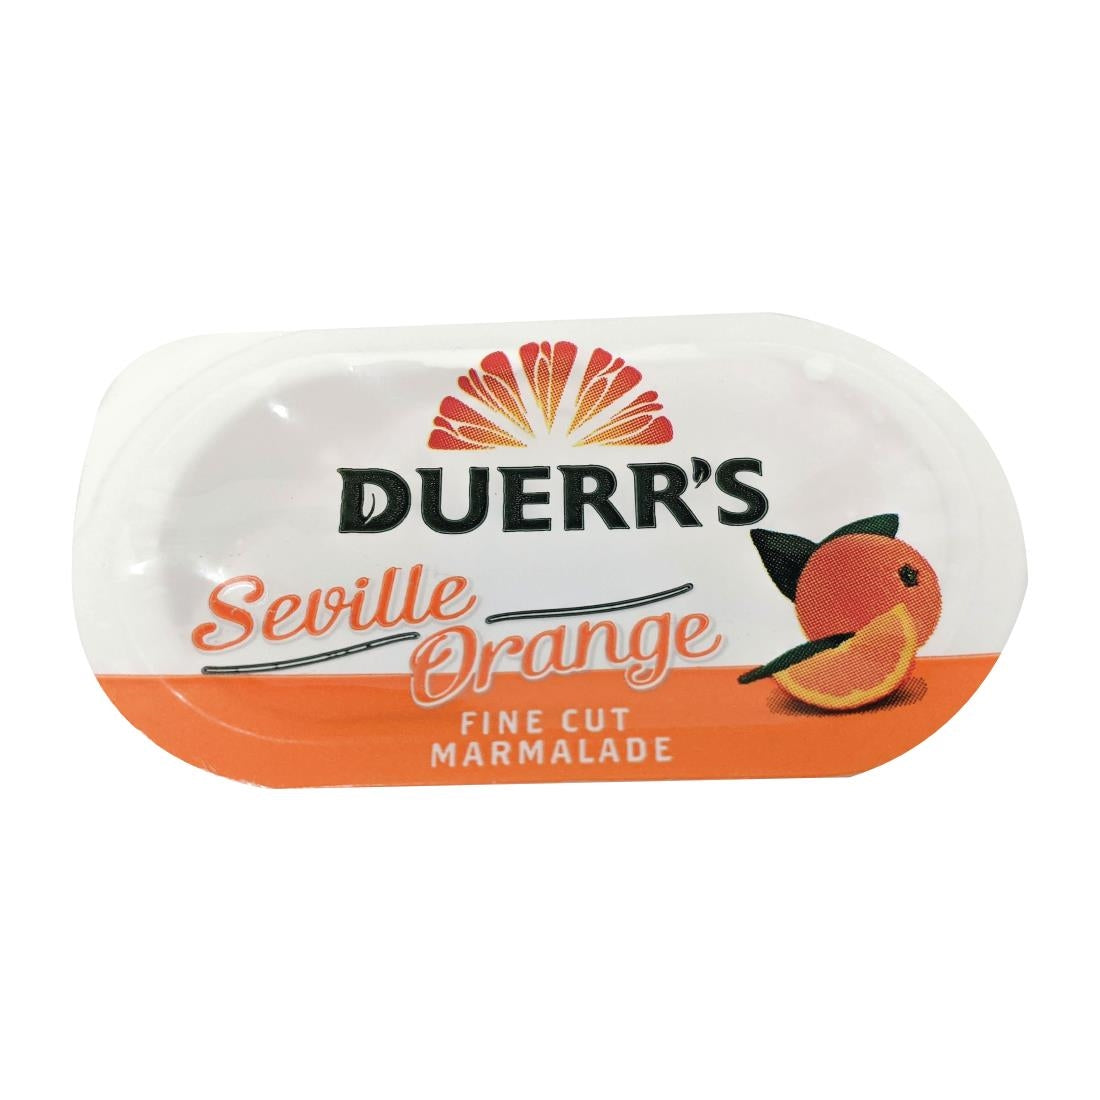 FW989 Duerrs Marmalade 20g (Pack of 96) JD Catering Equipment Solutions Ltd